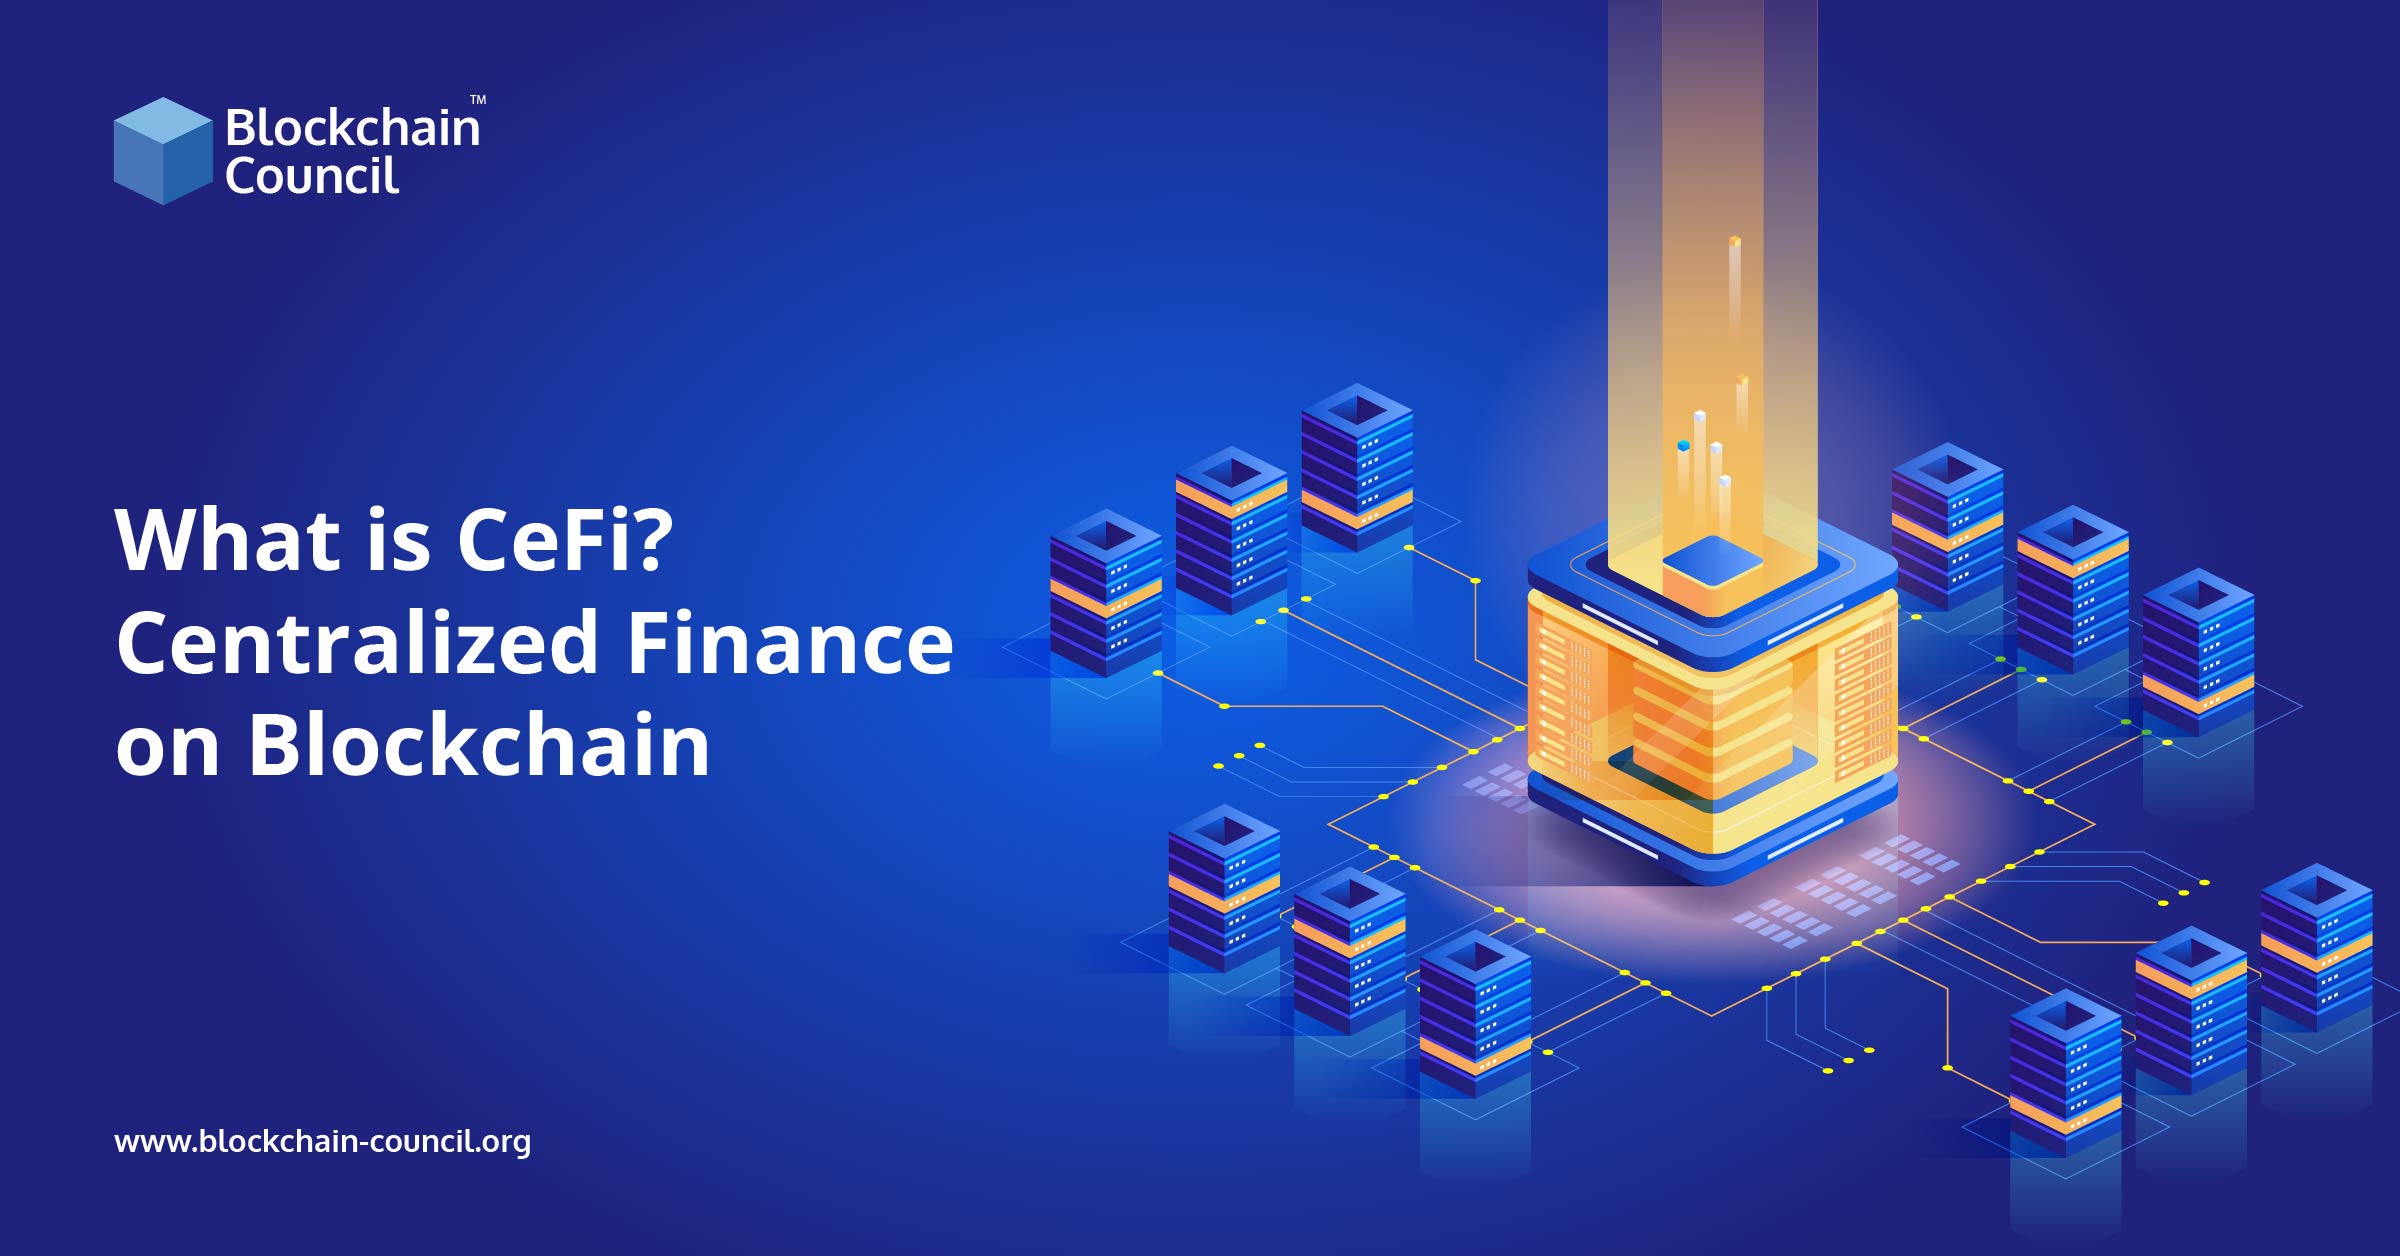 What is CeFi? Centralized Finance on Blockchain